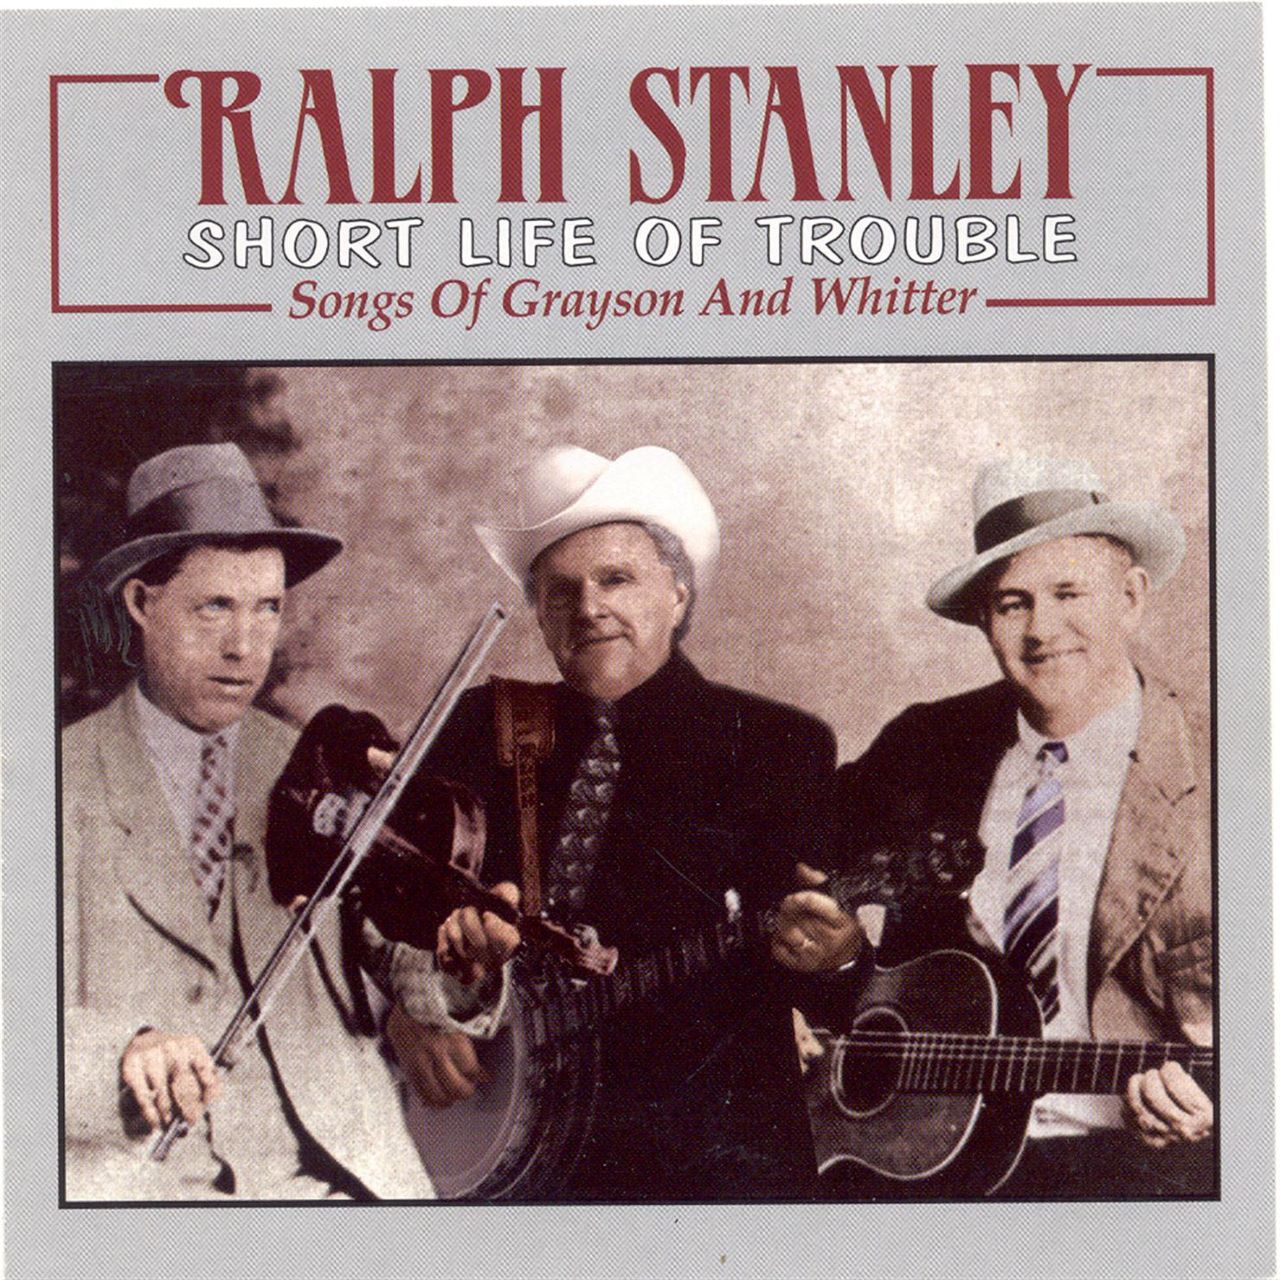 Ralph Stanley - Short Life Of Trouble - Songs Of Grayson And Whitter cover album